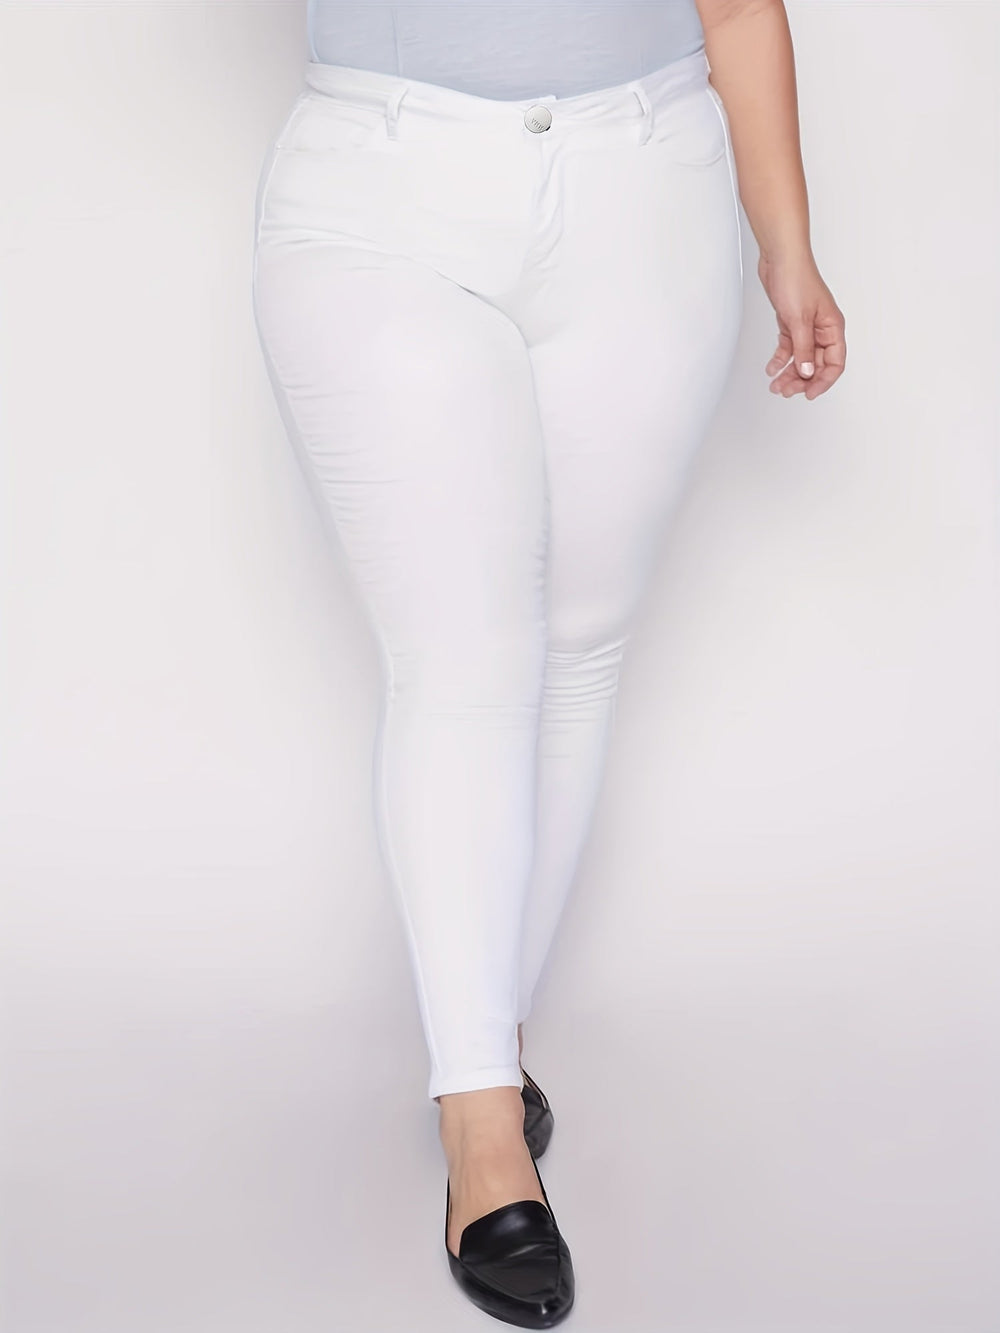 Flattering Button Fly High Stretch Plus Size Skinny Denim Jeans Gen U Us Products